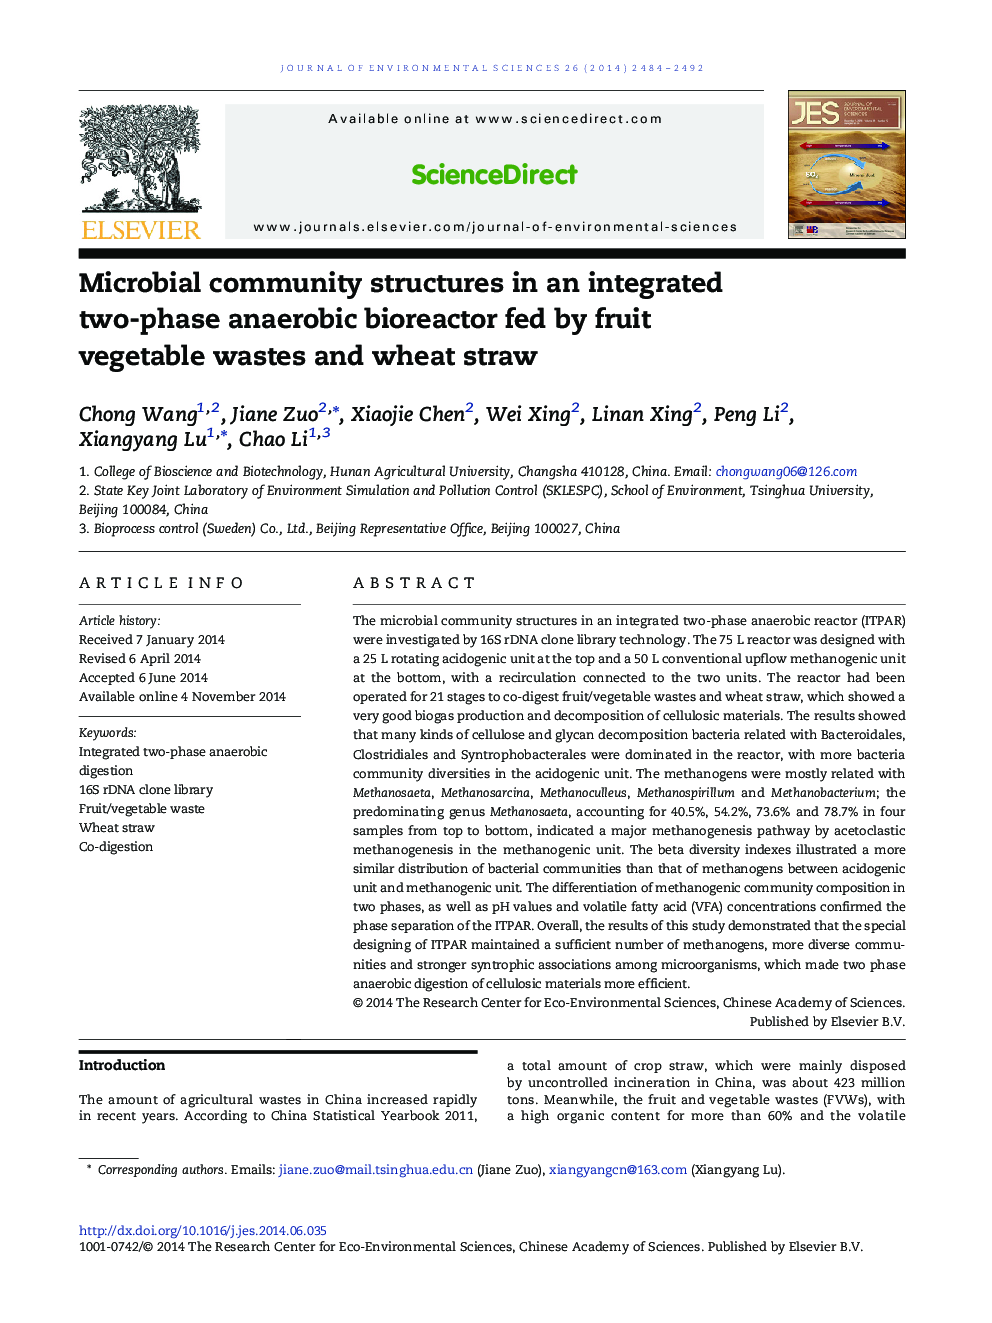 Microbial community structures in an integrated two-phase anaerobic bioreactor fed by fruit vegetable wastes and wheat straw